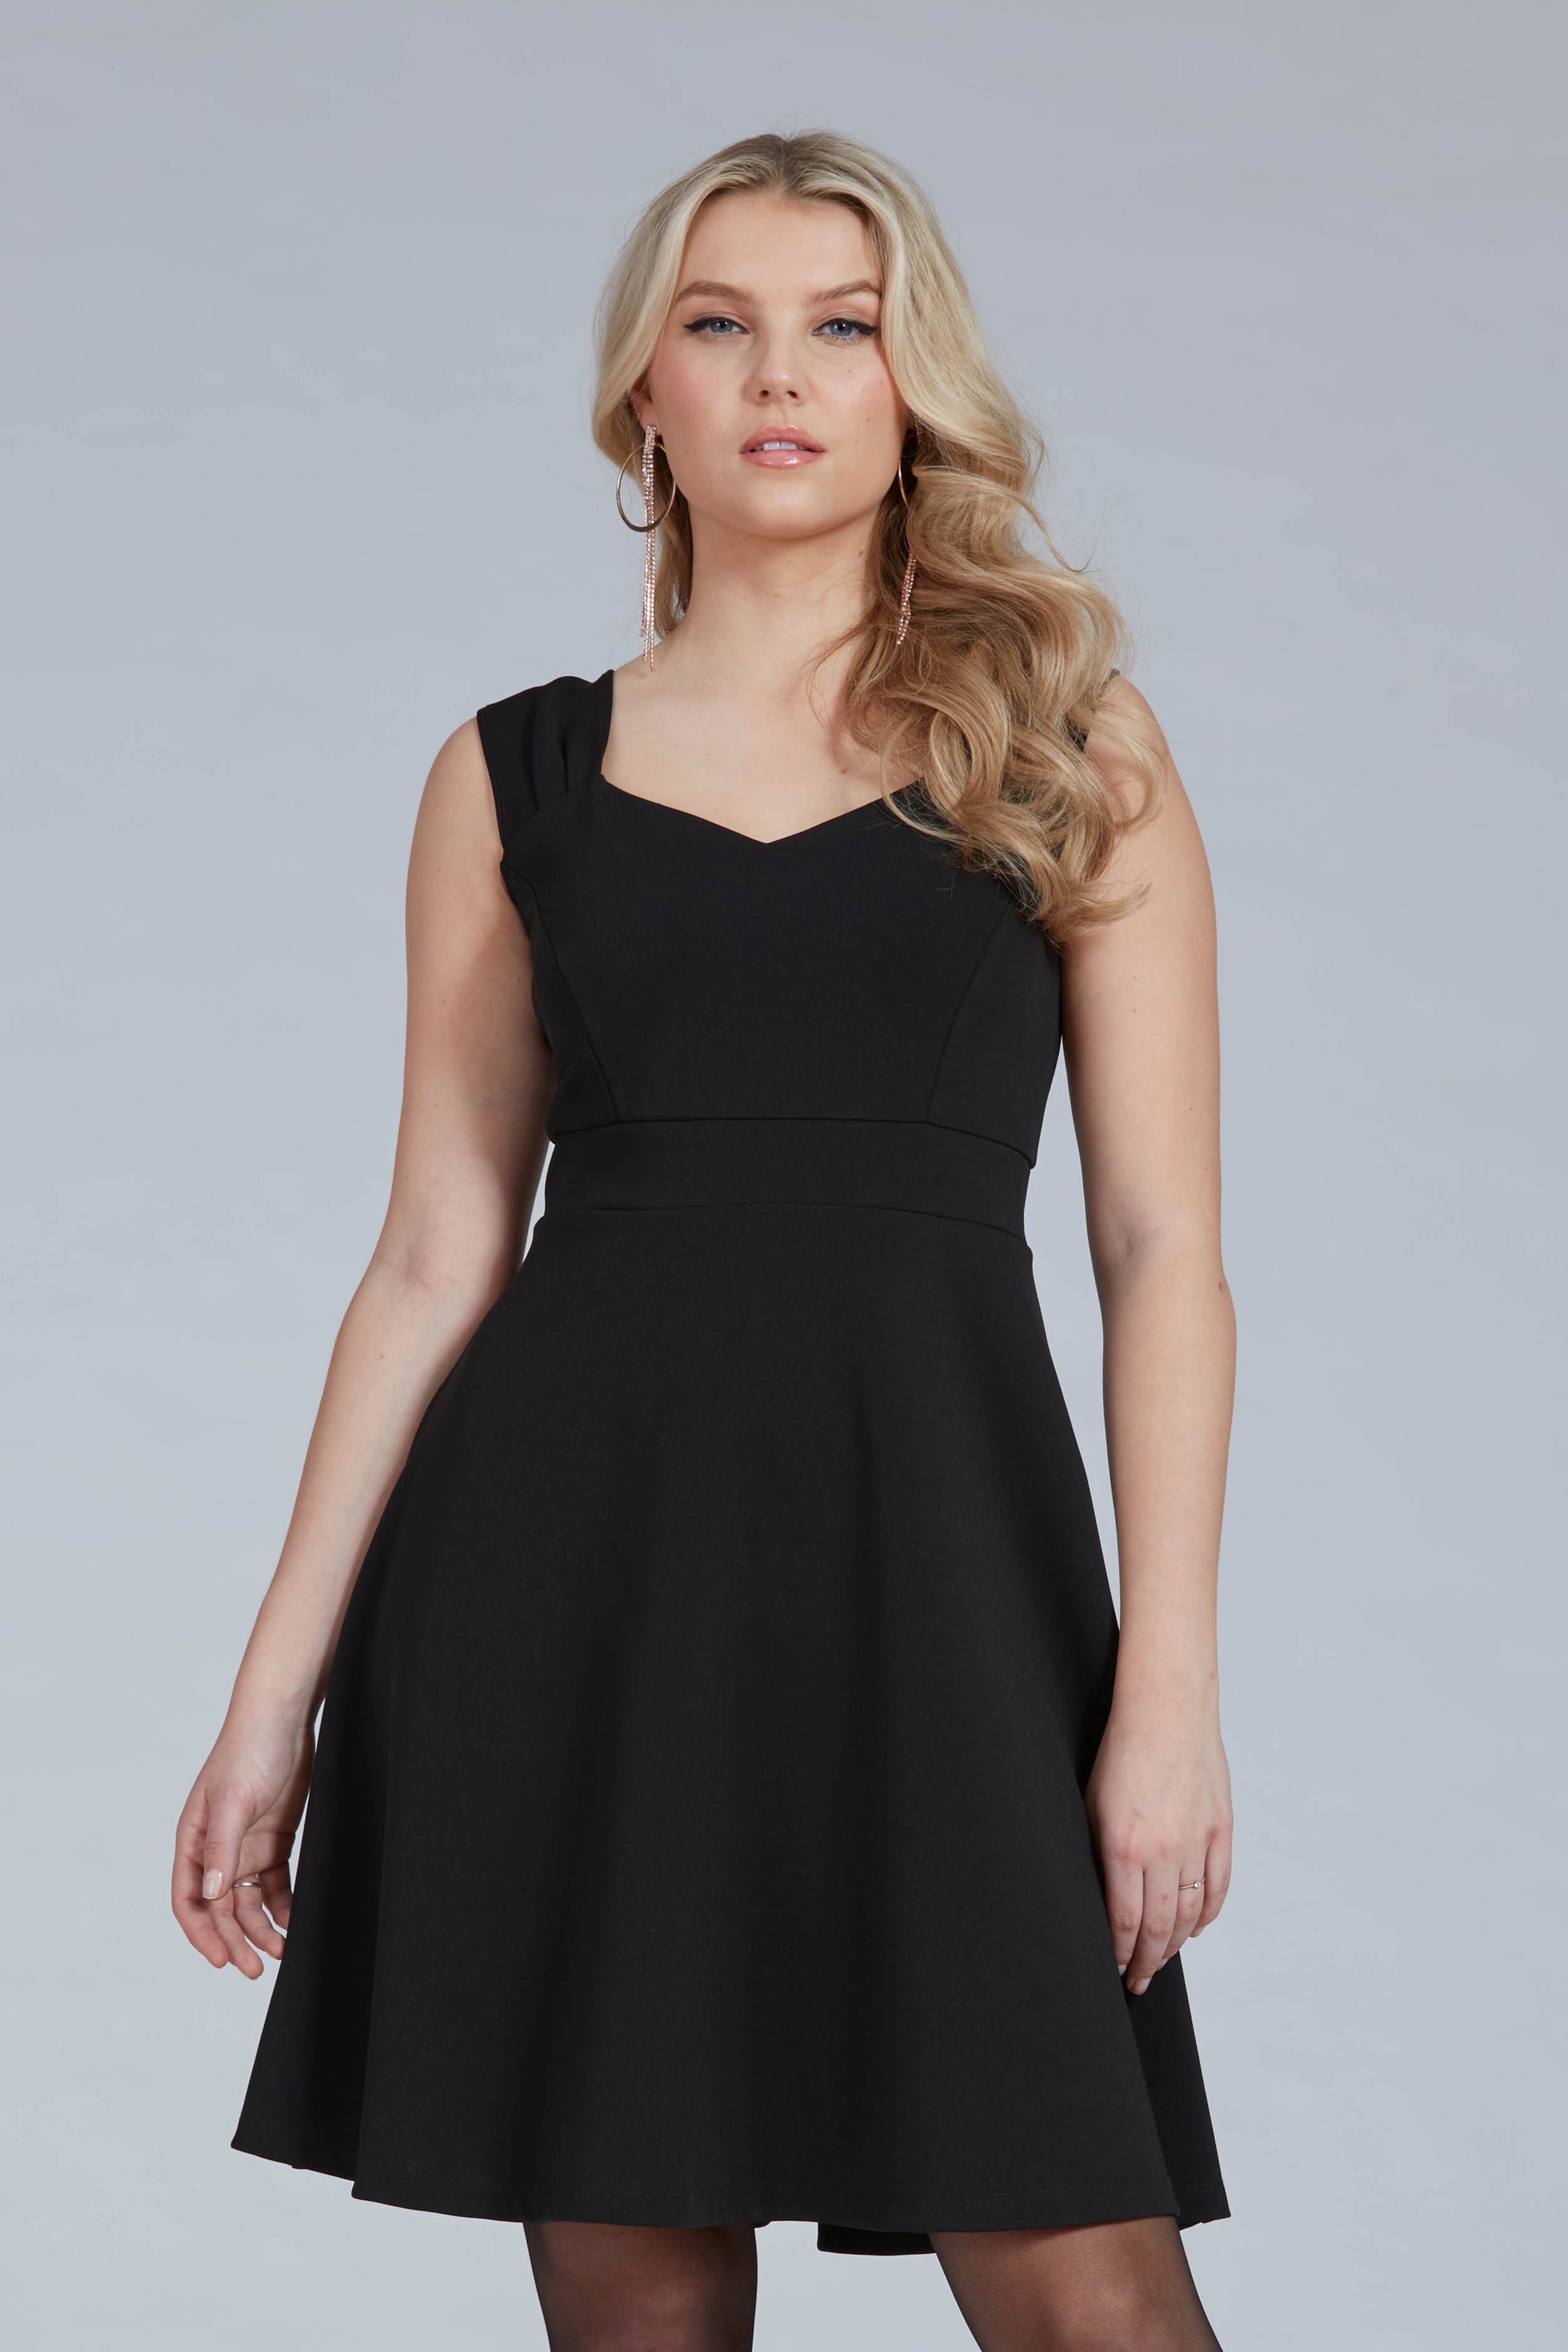 Trudy Dress by Luc Fontaine, Black, sleeveless, sweetheart neckline, fit and flare, darts at bust, waistband, sizes 4-16, made in Canada.